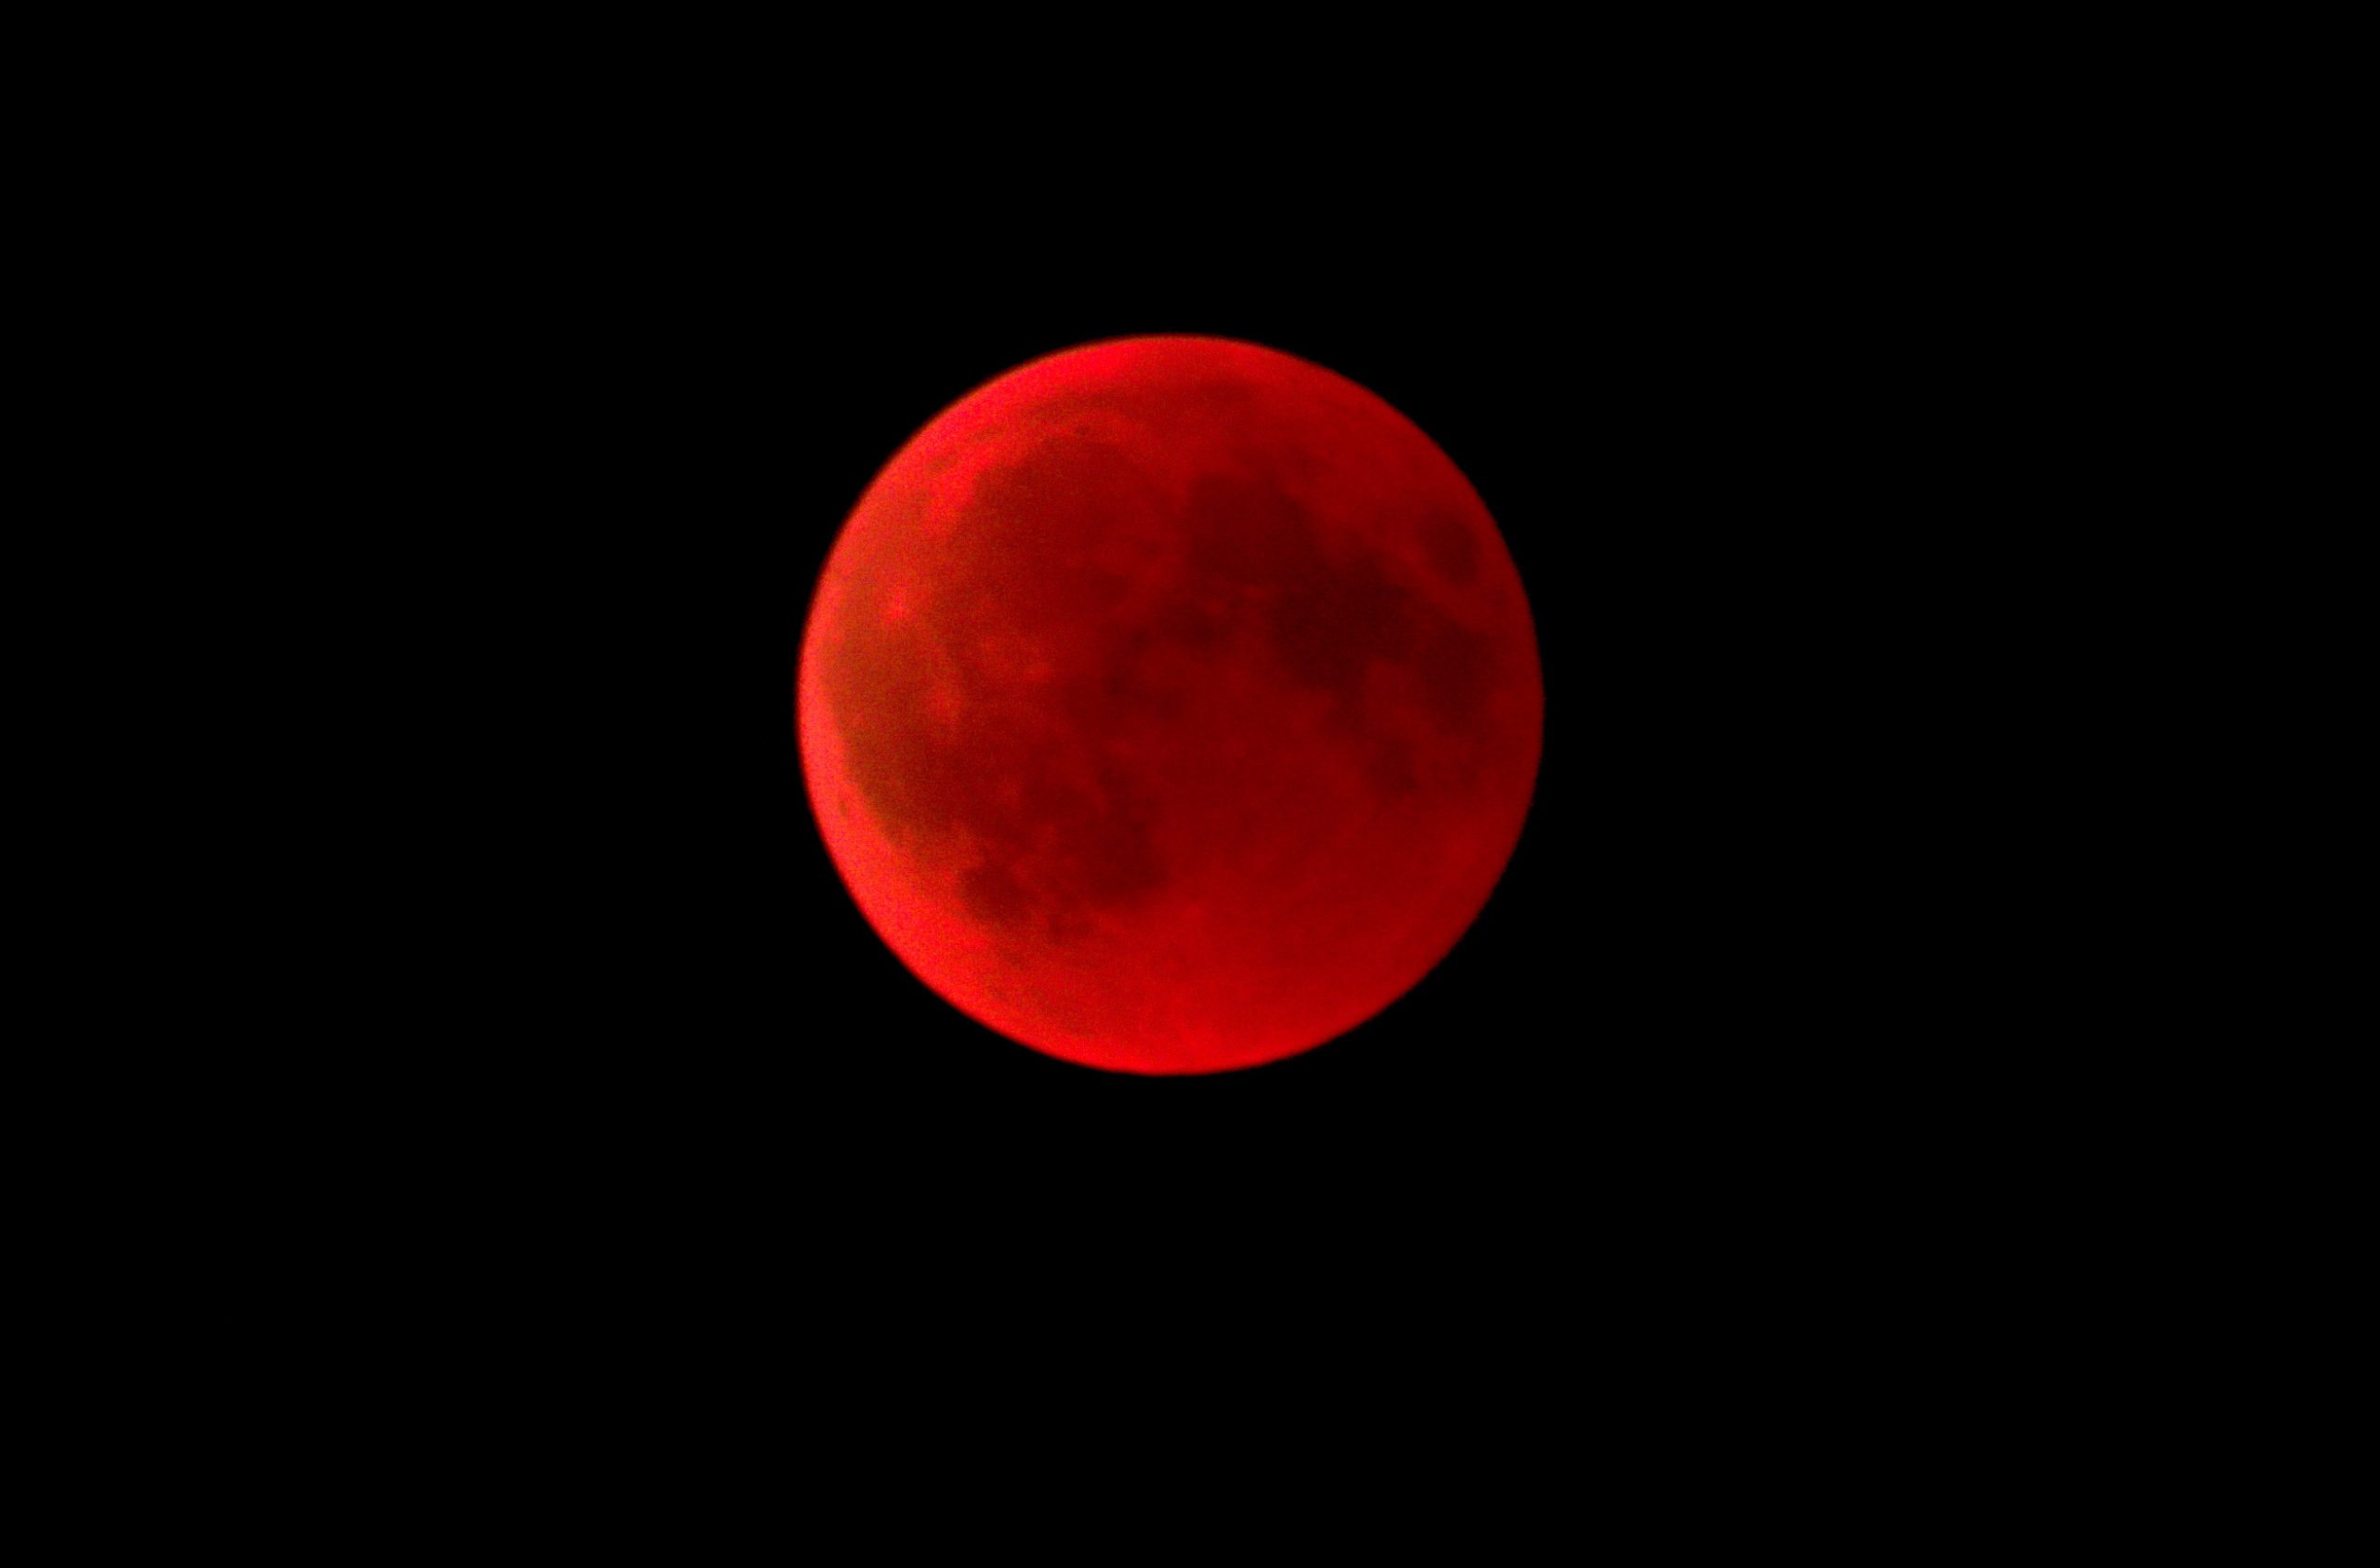 When is the next full moon? A blood red full ‘supermoon’ full moon – a total lunar eclipse – is coming to North America on May 26, 2021. It’